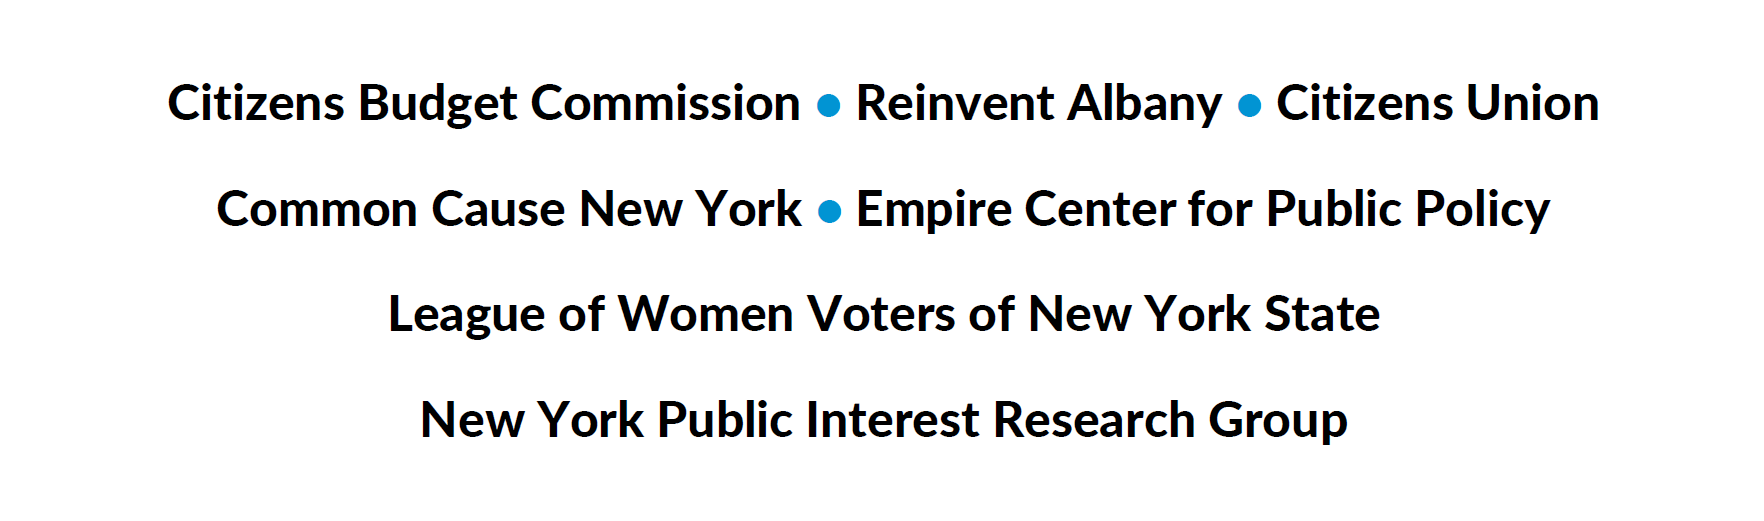 Citizens Budget Commission • Reinvent Albany • Citizens Union Common Cause New York • Empire Center for Public Policy League of Women Voters of New York State New York Public Interest Research Group 